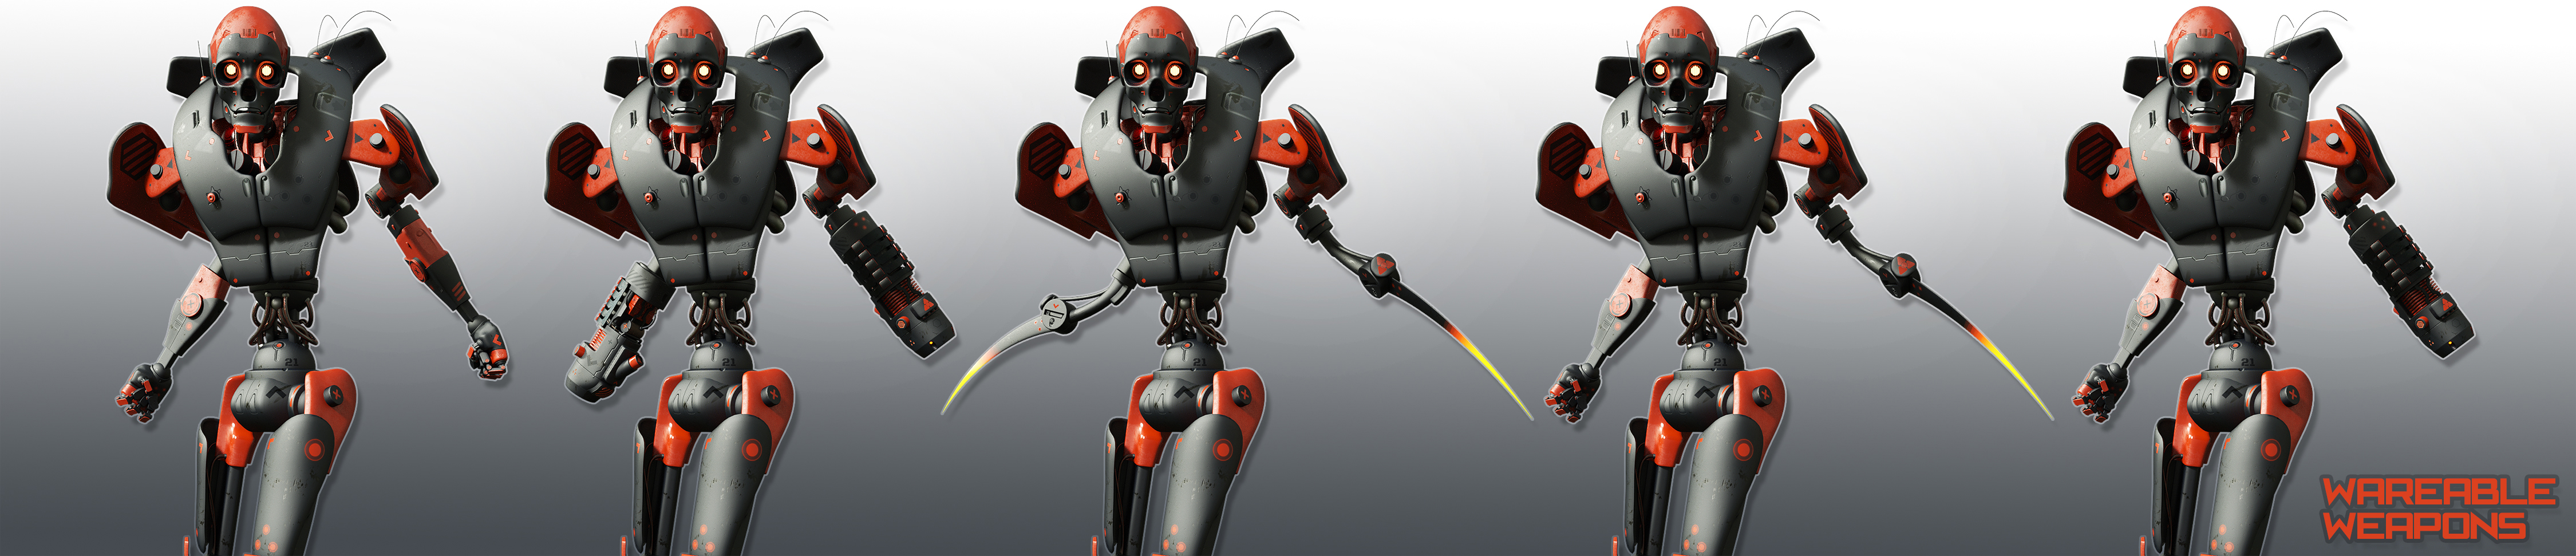 Reaper Bot and Poses by: The AntFarm, 3D Models by Daz 3D